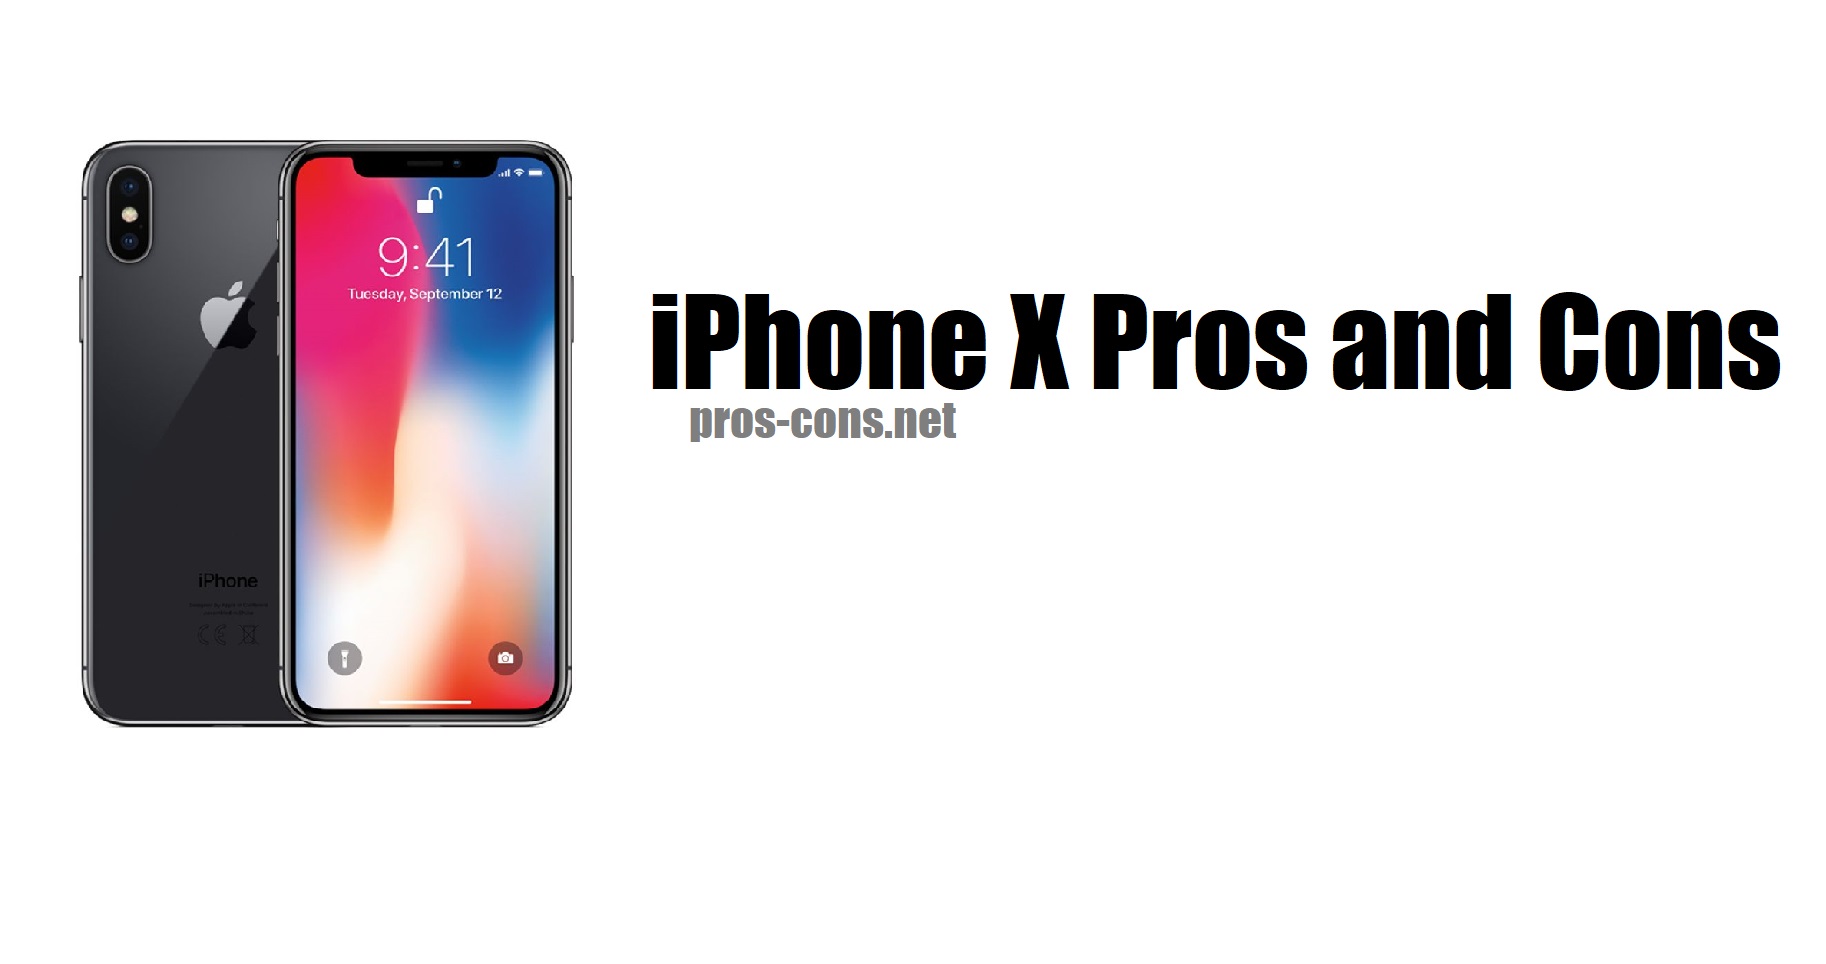 pros and cons of iPhone X